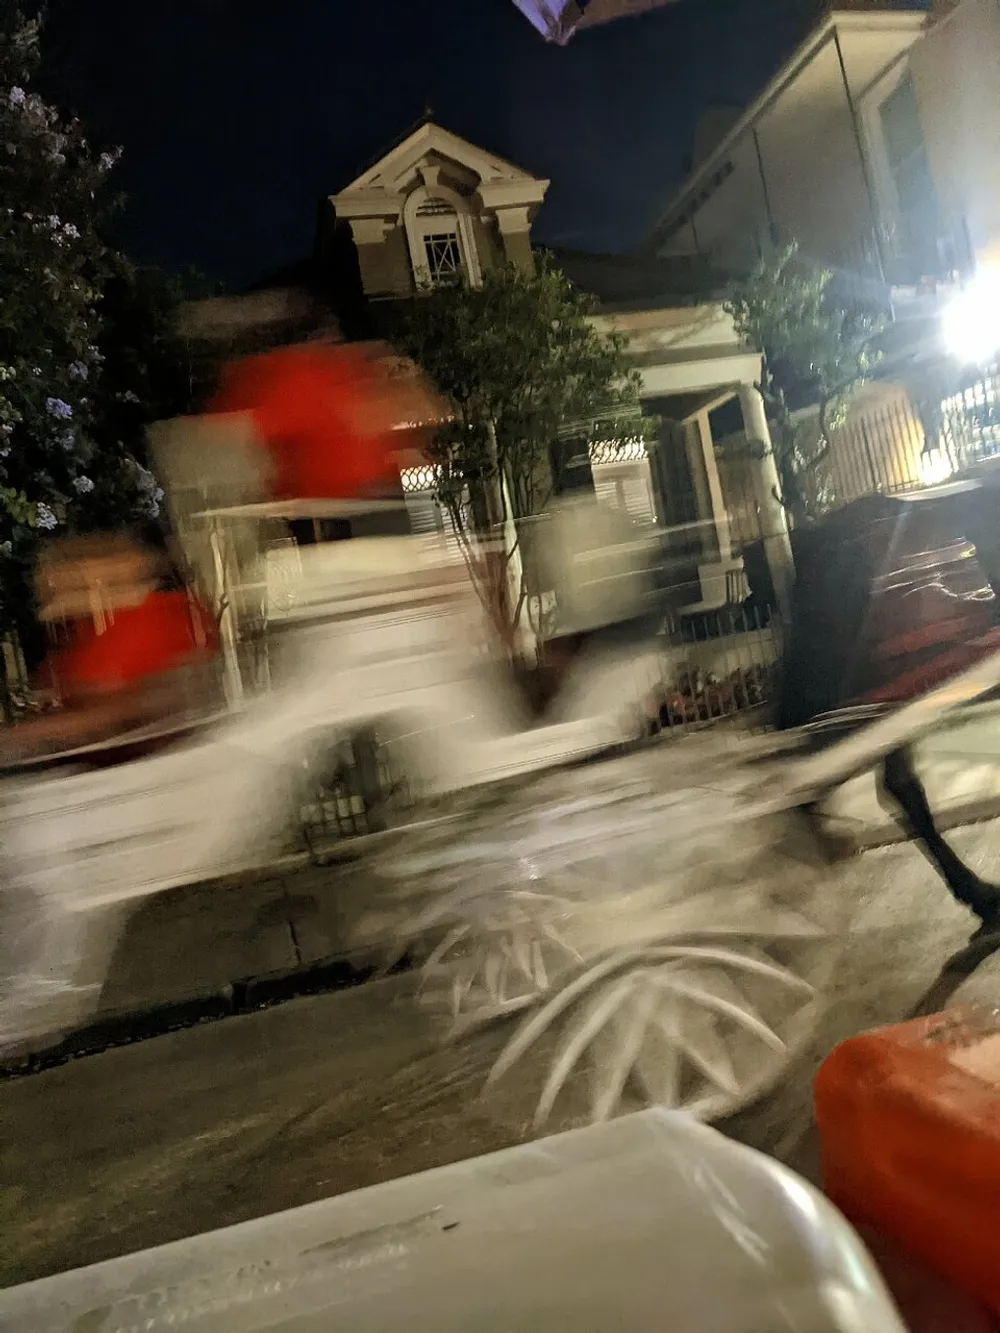 The image shows a blurred scene on a street at night with a house in the background creating a sense of motion likely from a moving vehicle or camera shake